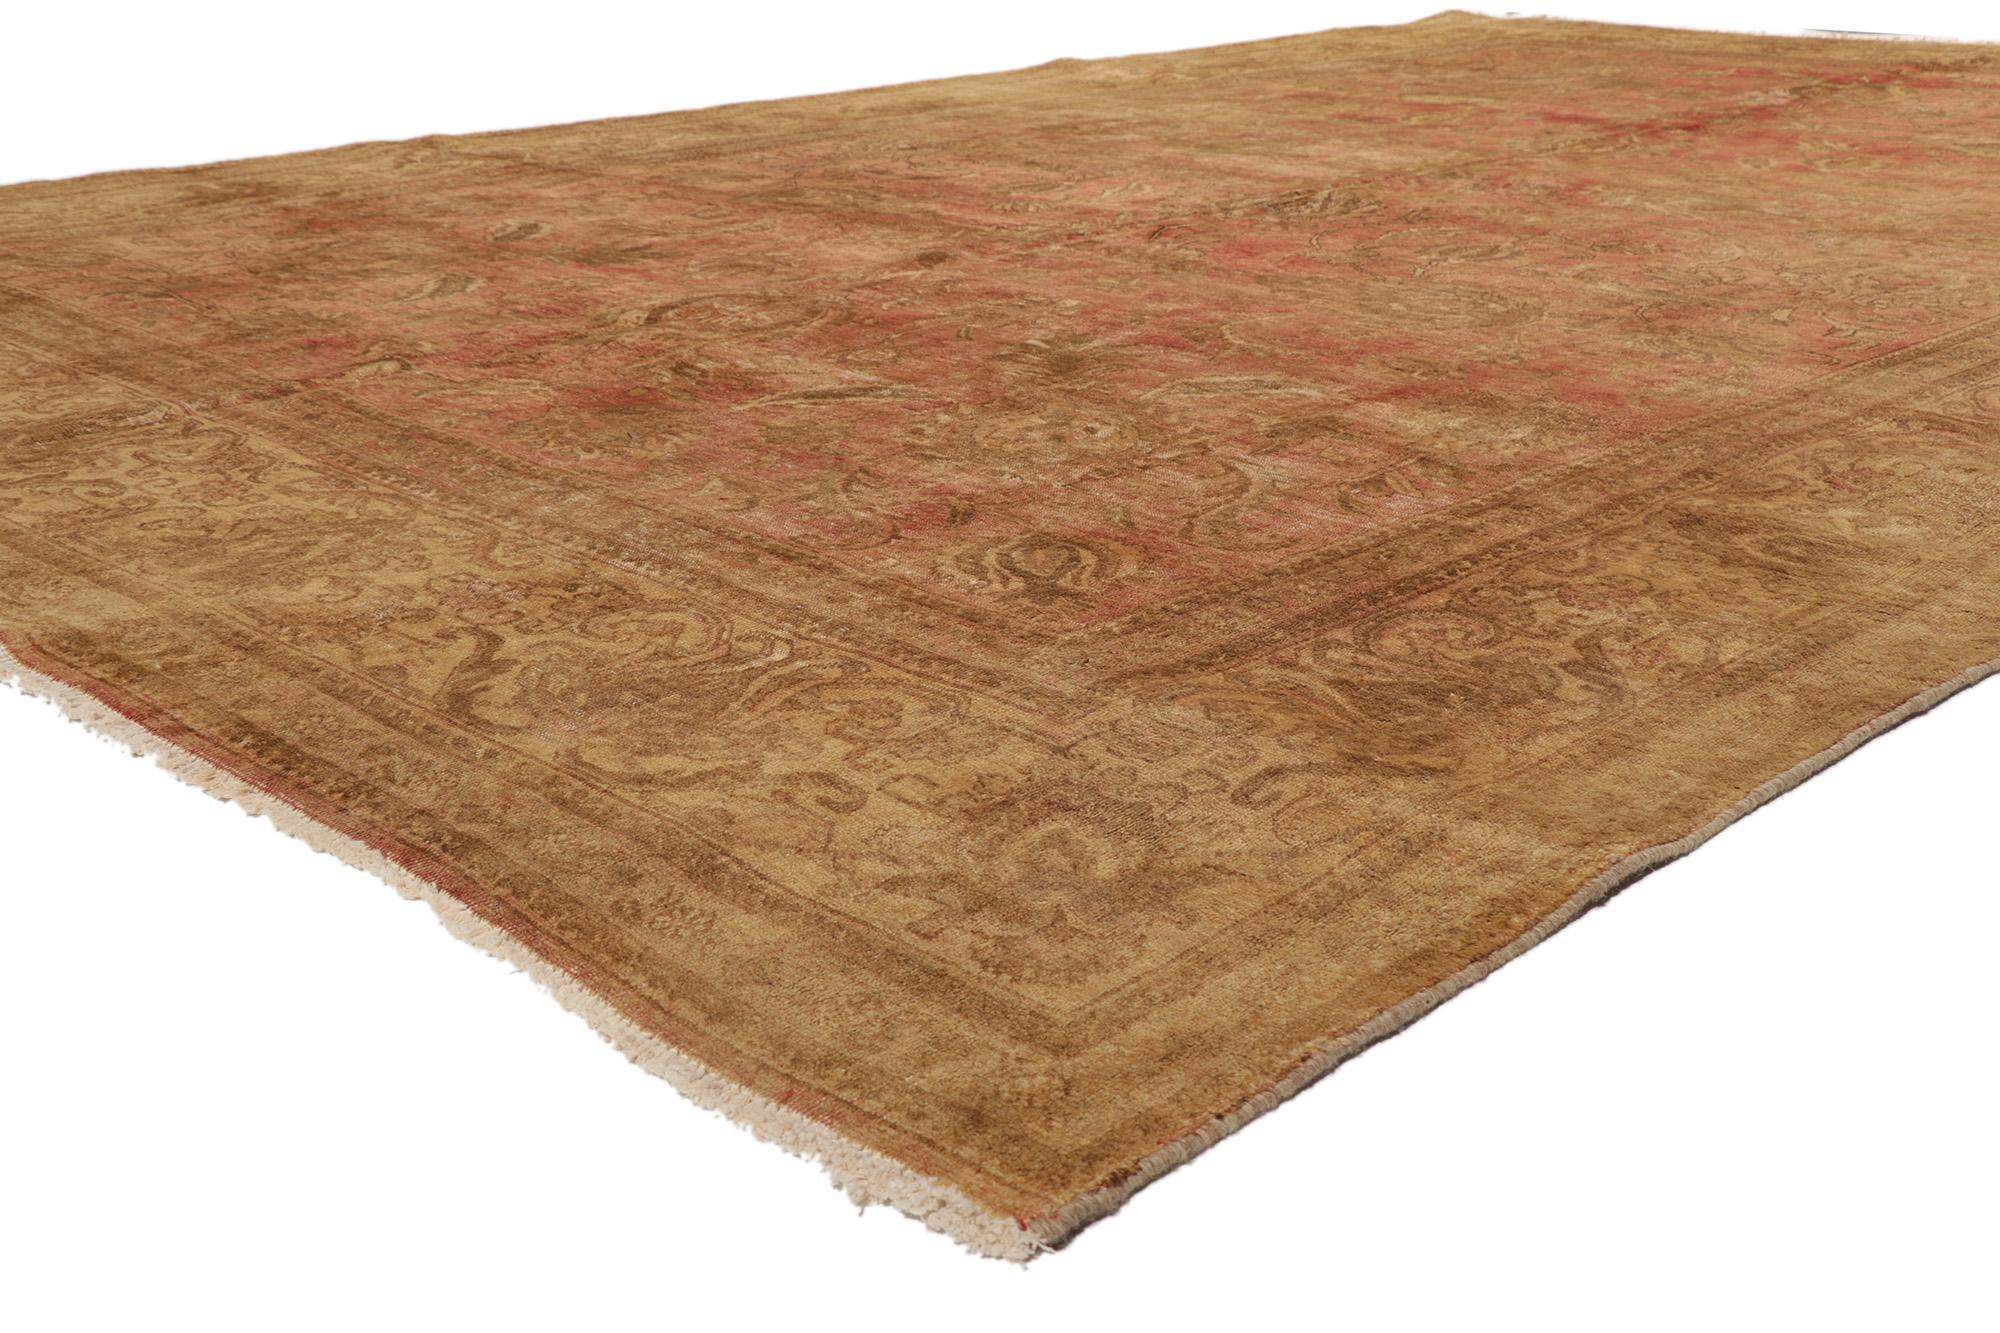 60739, Distressed Antique Persian Tabriz Rug with Rustic English Cottage  Style 10'10 x 16'03. With timeless elegance and lovingly timeworn appearance, this hand knotted wool distressed antique Persian Tabriz rug charms with ease and beautifully